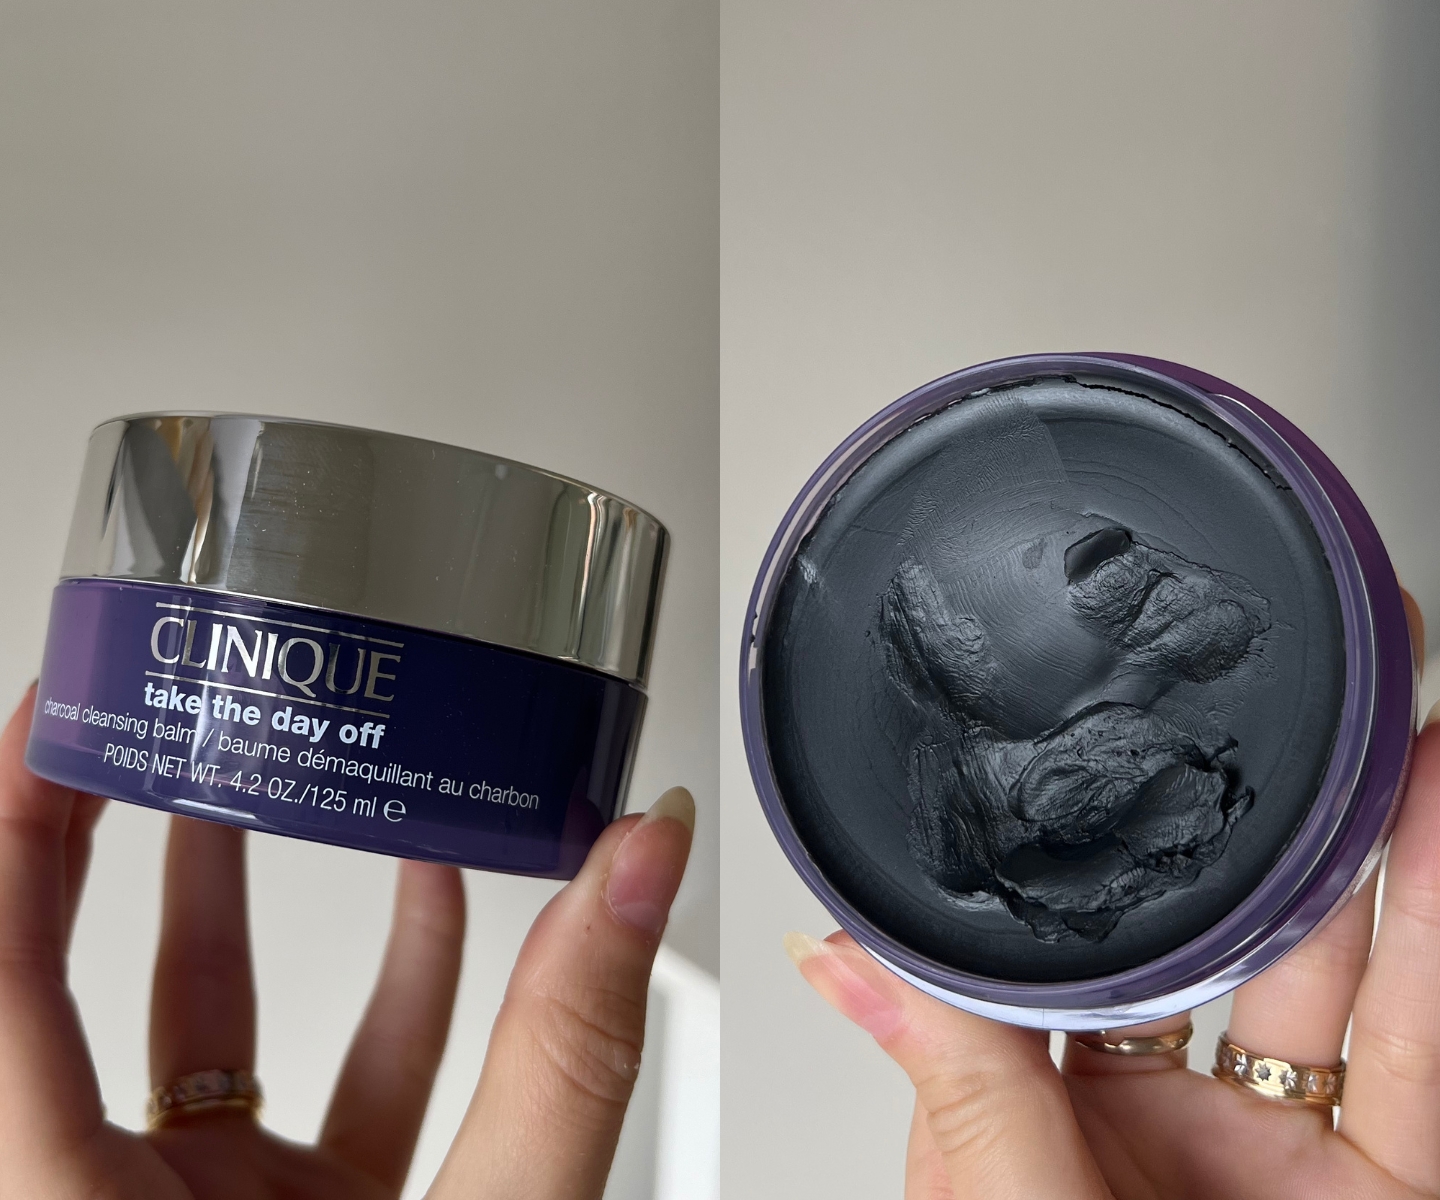 Clinique Take The Day Off™ Cleansing Balm baume démaquillant et